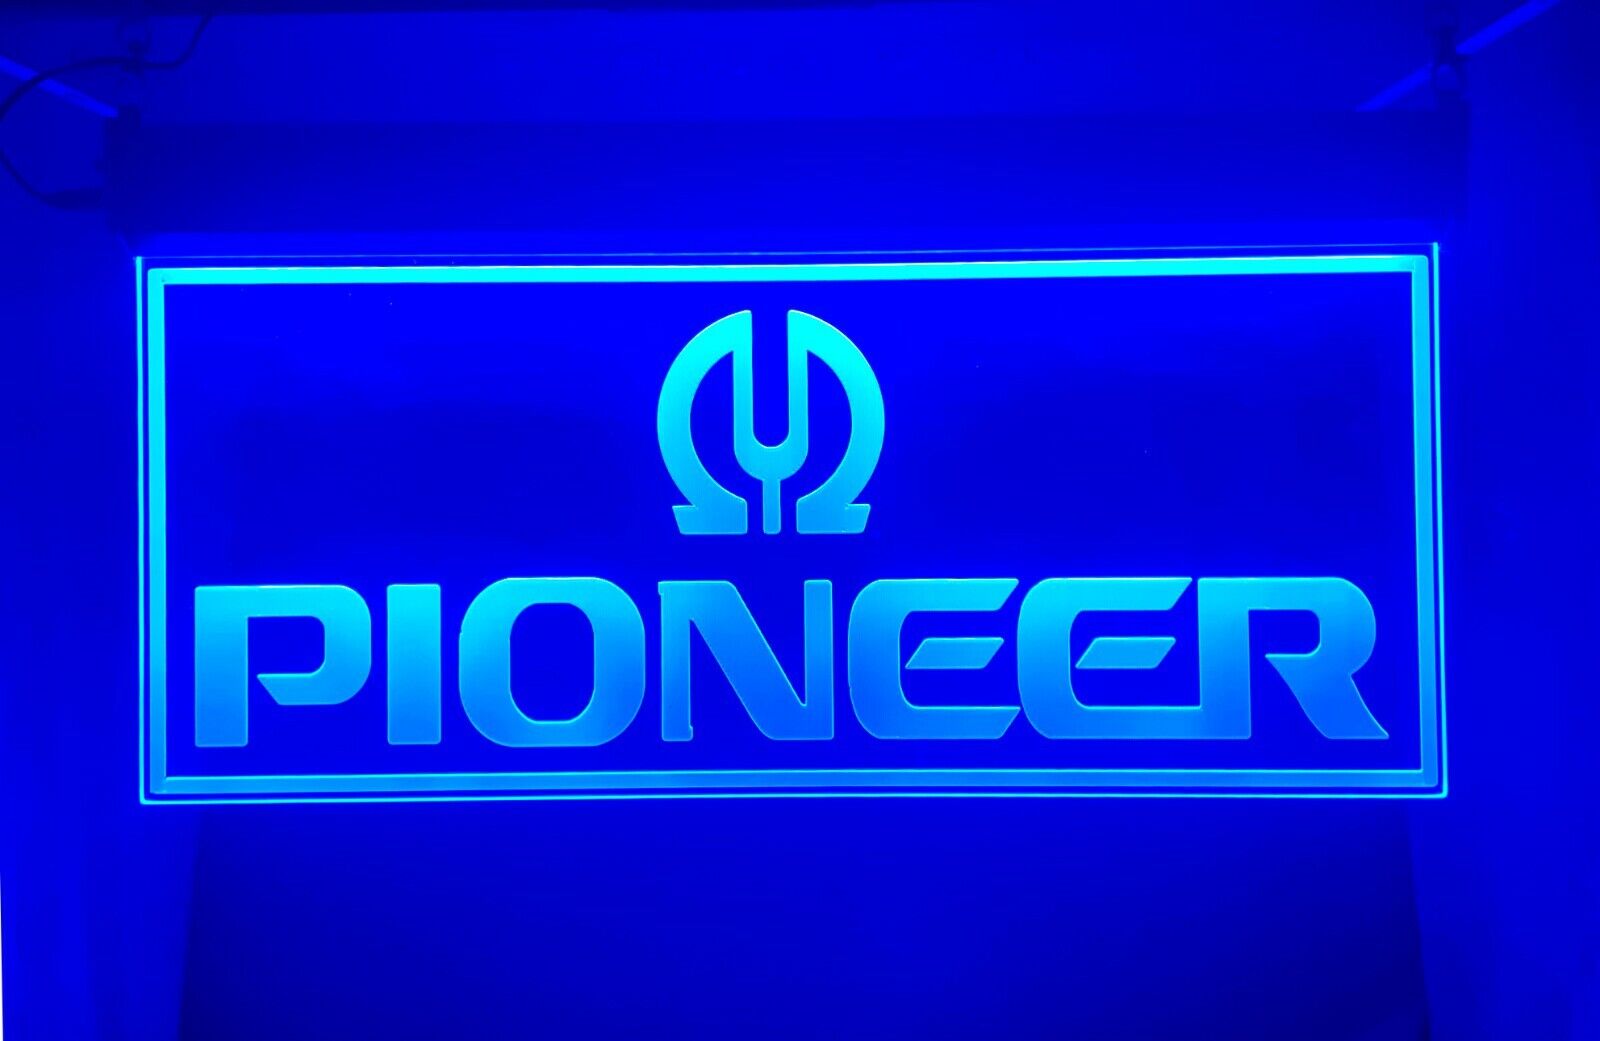 PIONEER LOGO LED  Signs Neon Light Stereo Car Audio Hanging Garage Sign Man Cave